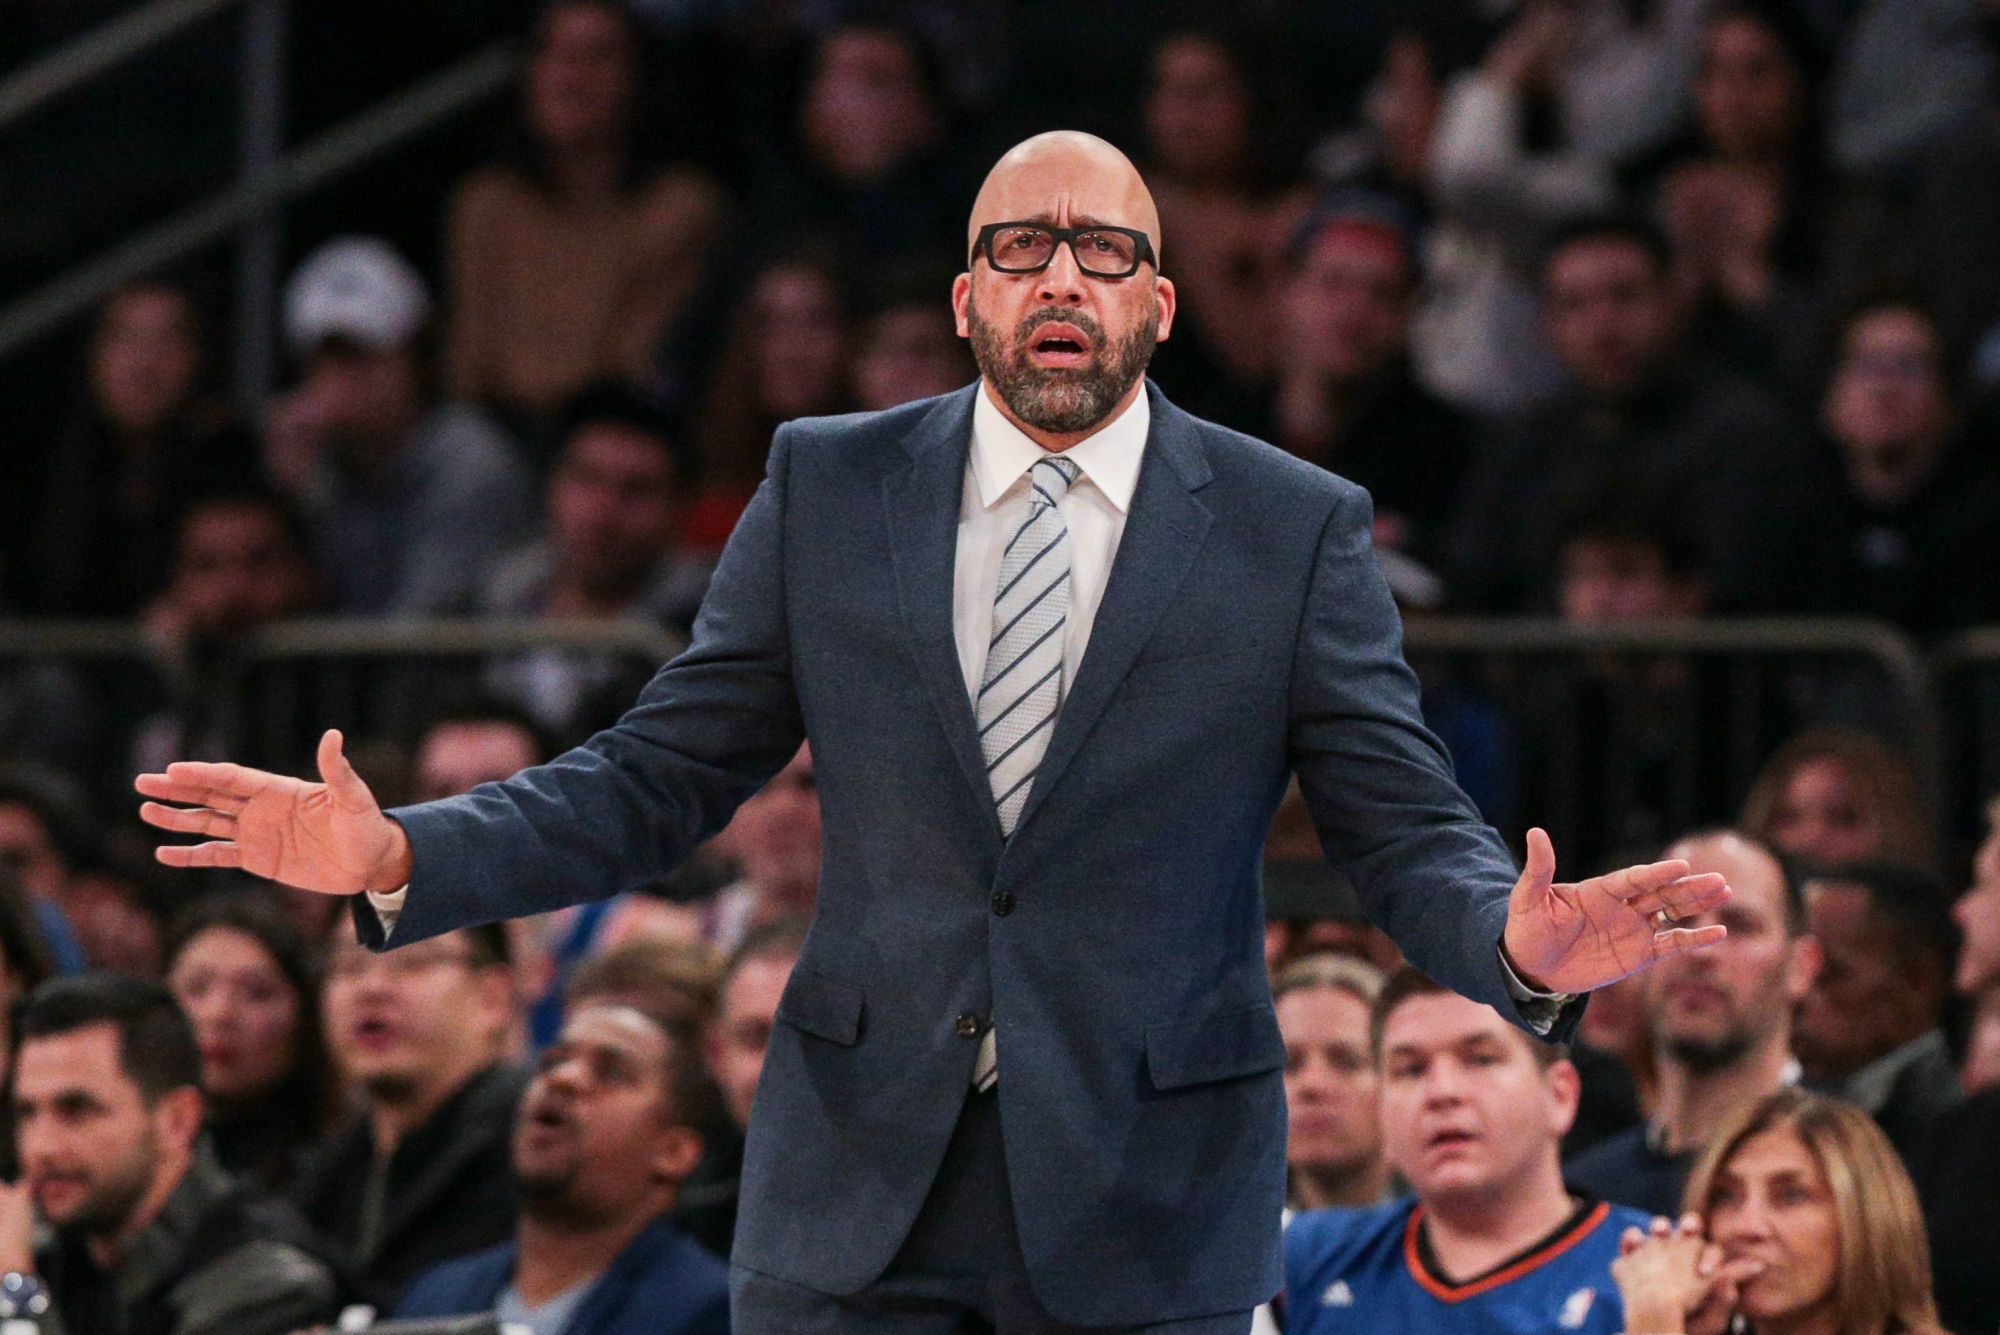 Nov 23, 2019; New York, NY, USA; New York Knicks ahead coach David Fizdale reacts during the first quarter against the San Antonio Spurs at Madison Square Garden. Mandatory Credit: Vincent Carchietta-USA TODAY Sports/Sipa USA 

Photo by Icon Sport - David FIZDALE - Madison Square Garden - New York (Etats Unis)